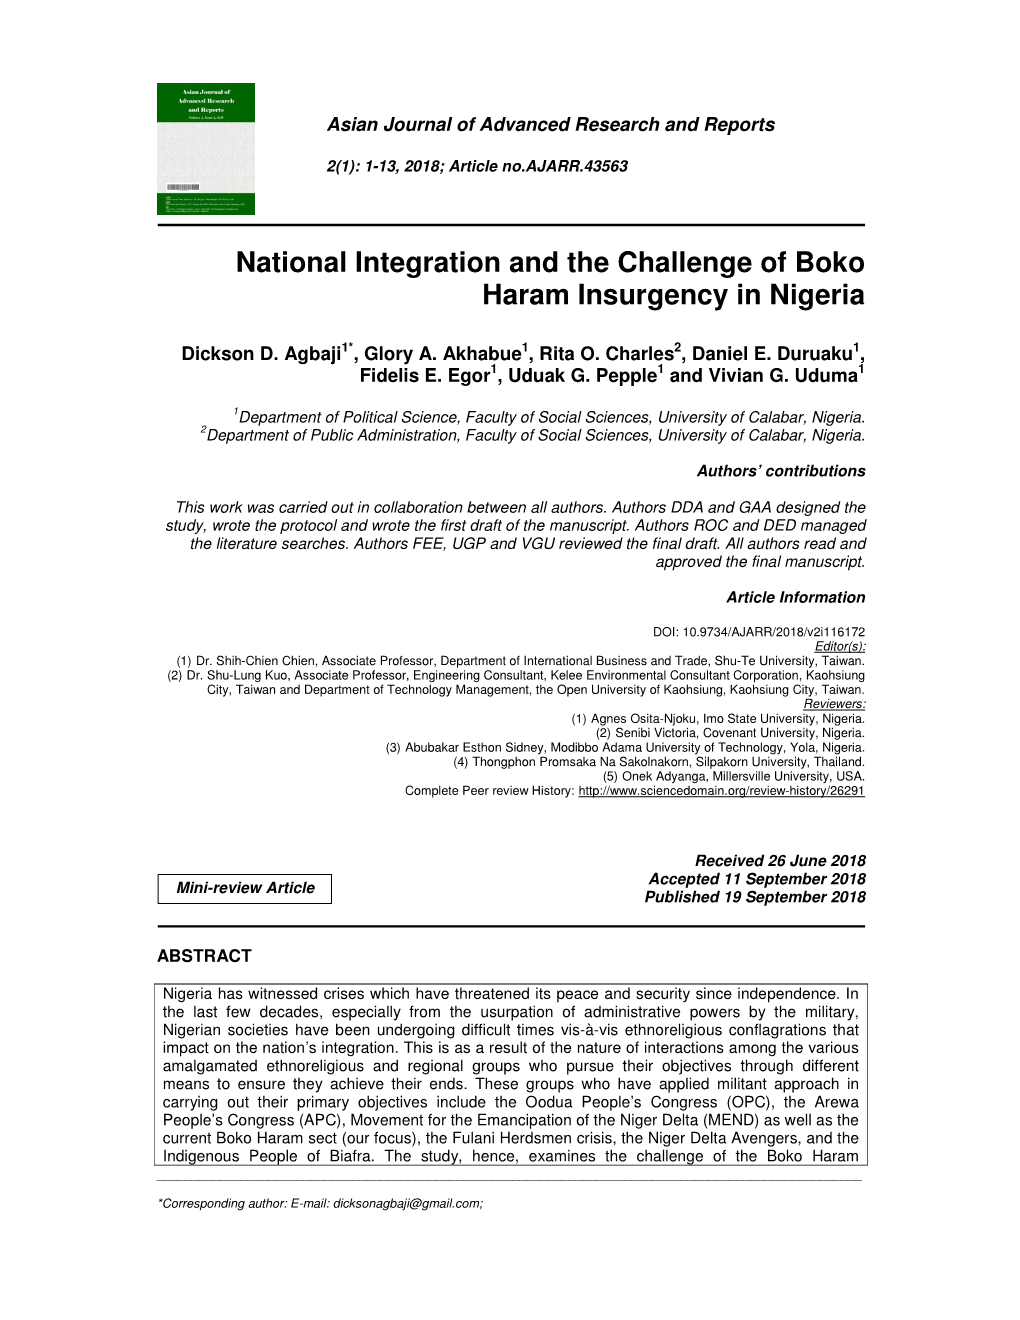 National Integration and the Challenge of Boko Haram Insurgency in Nigeria